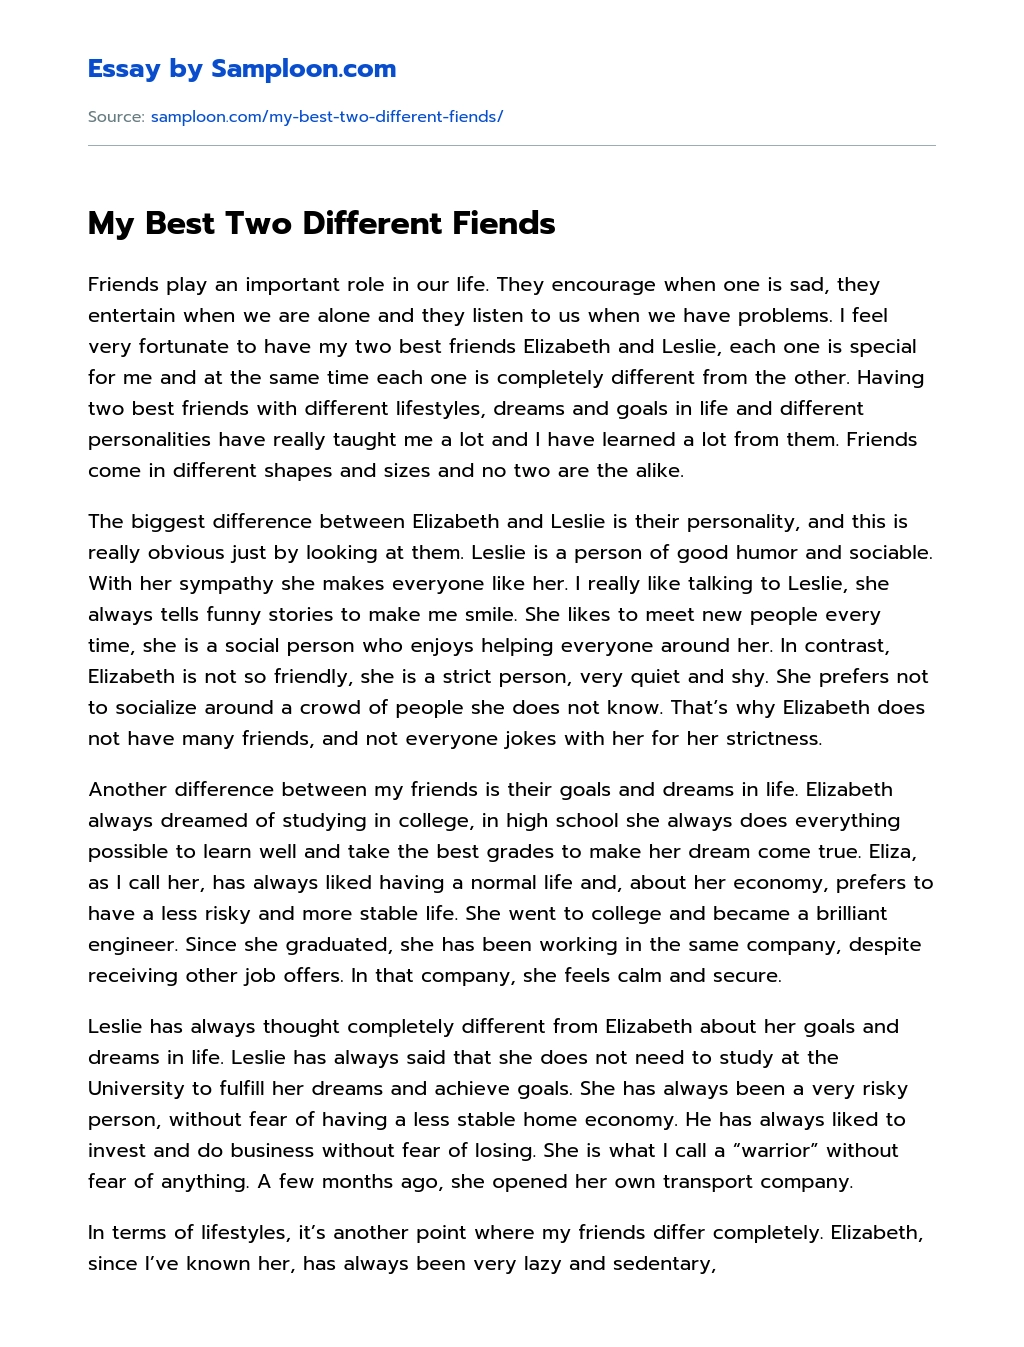 My Best Two Different Fiends essay